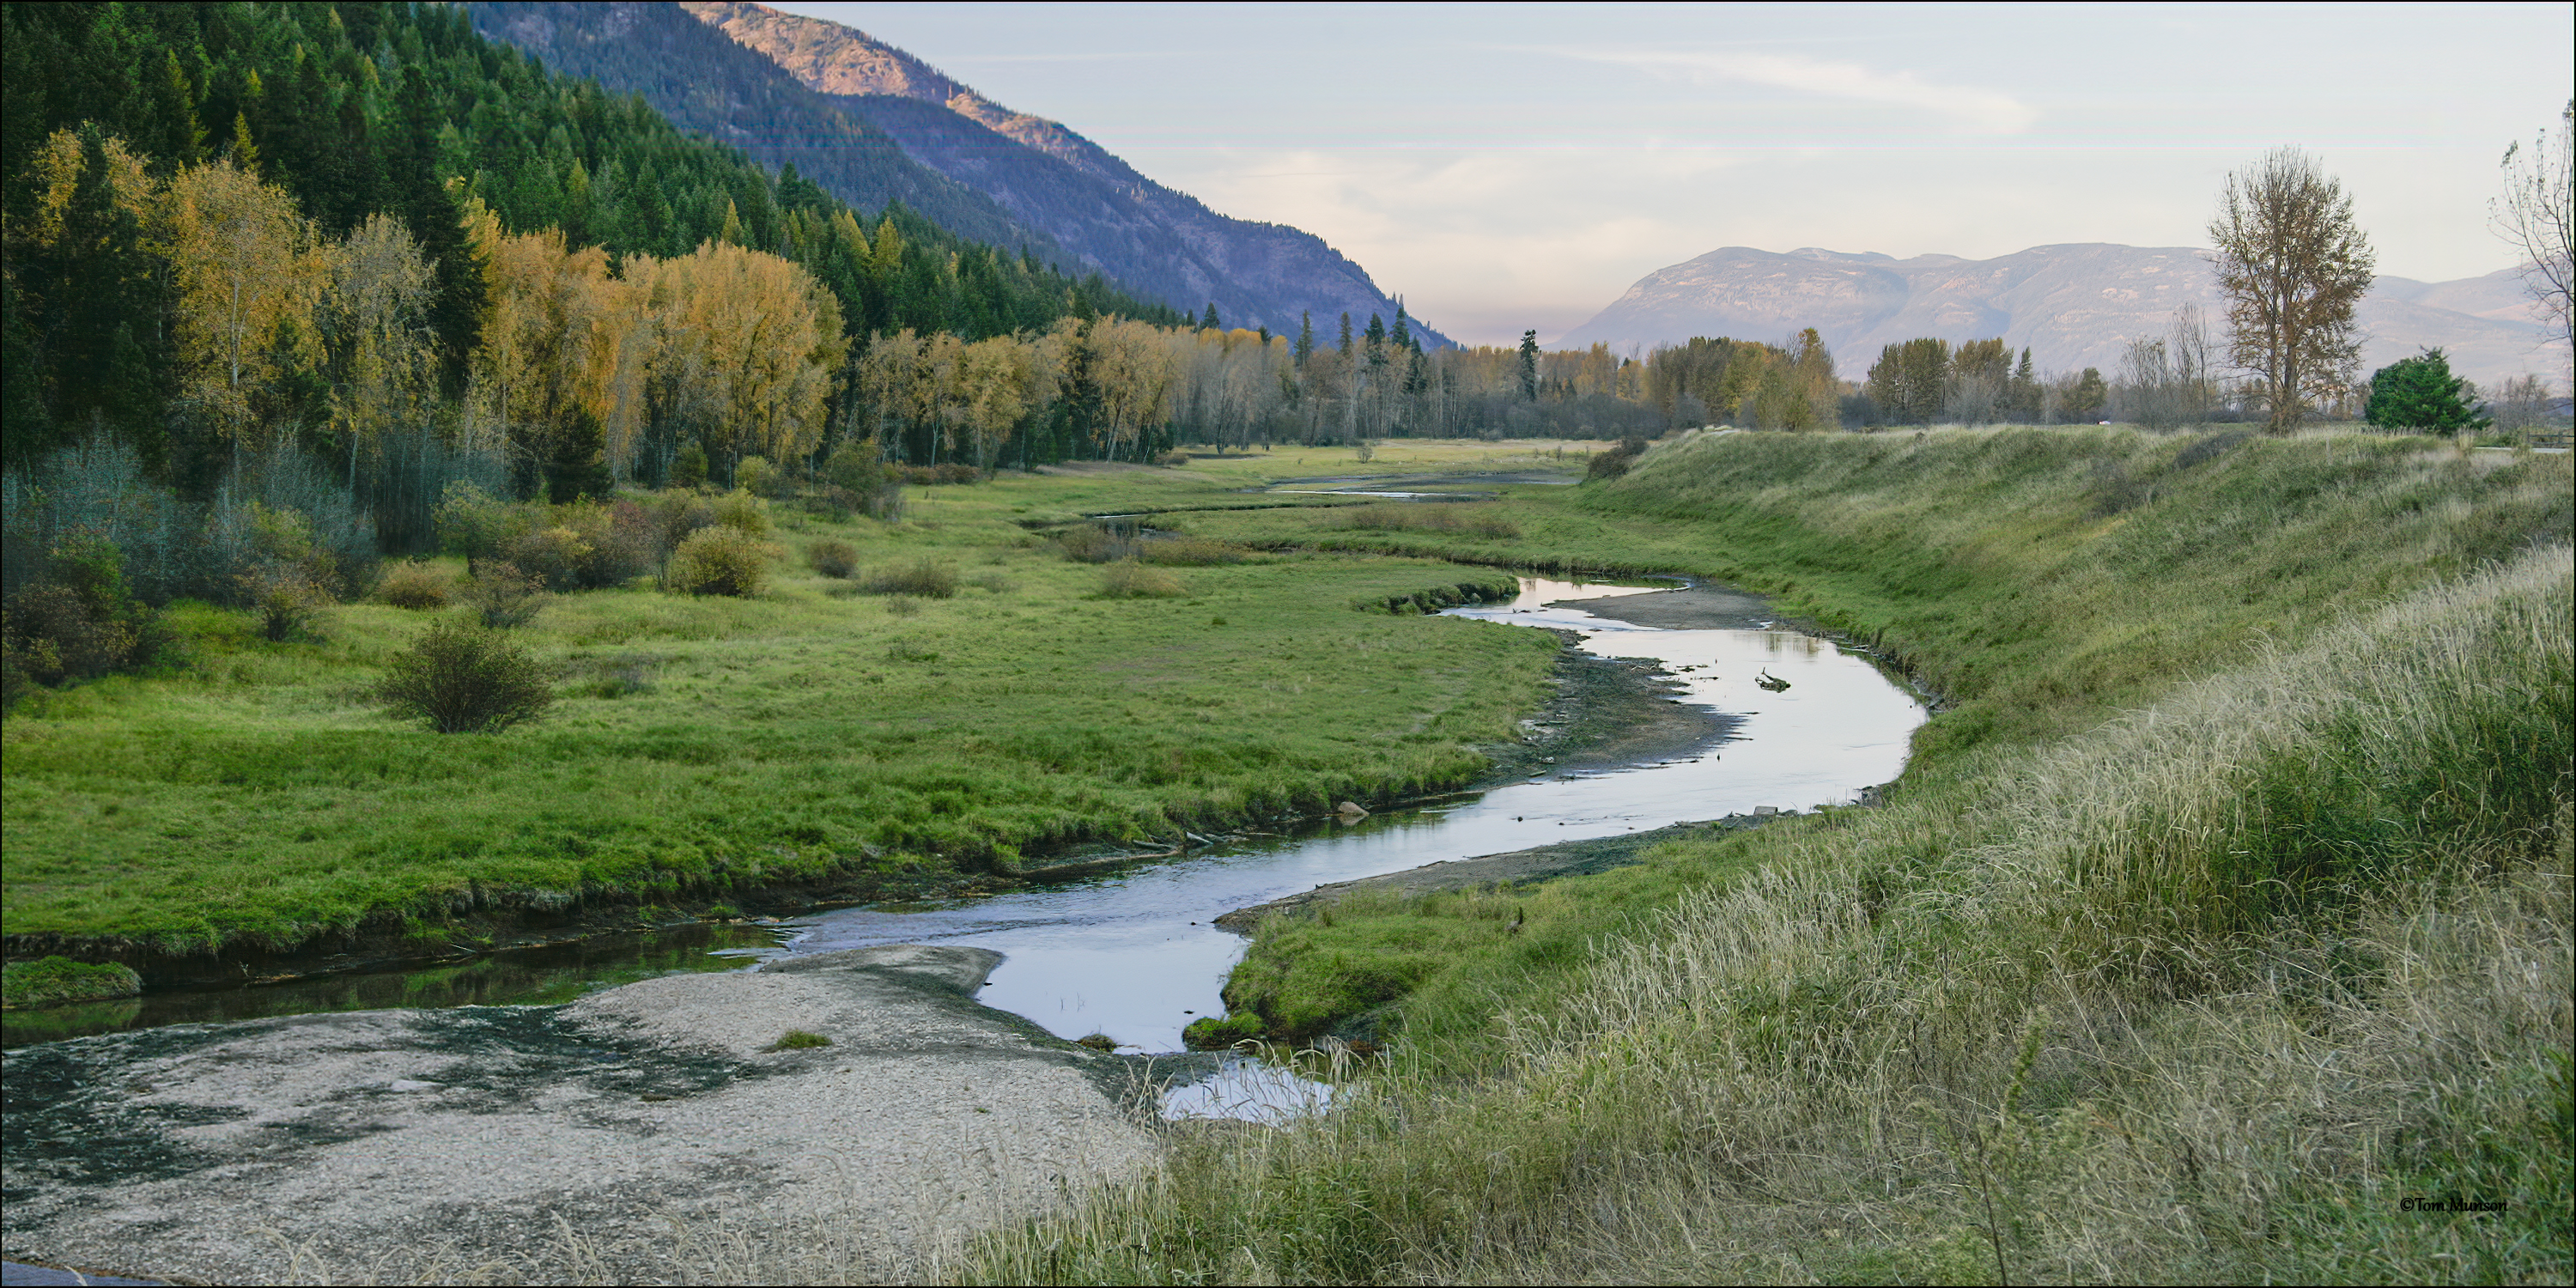 Nestled beside the Selkirk Mountains of northern Idaho, this 2,774 acre refuge provides diverse habitats for a large variety of wildlife.